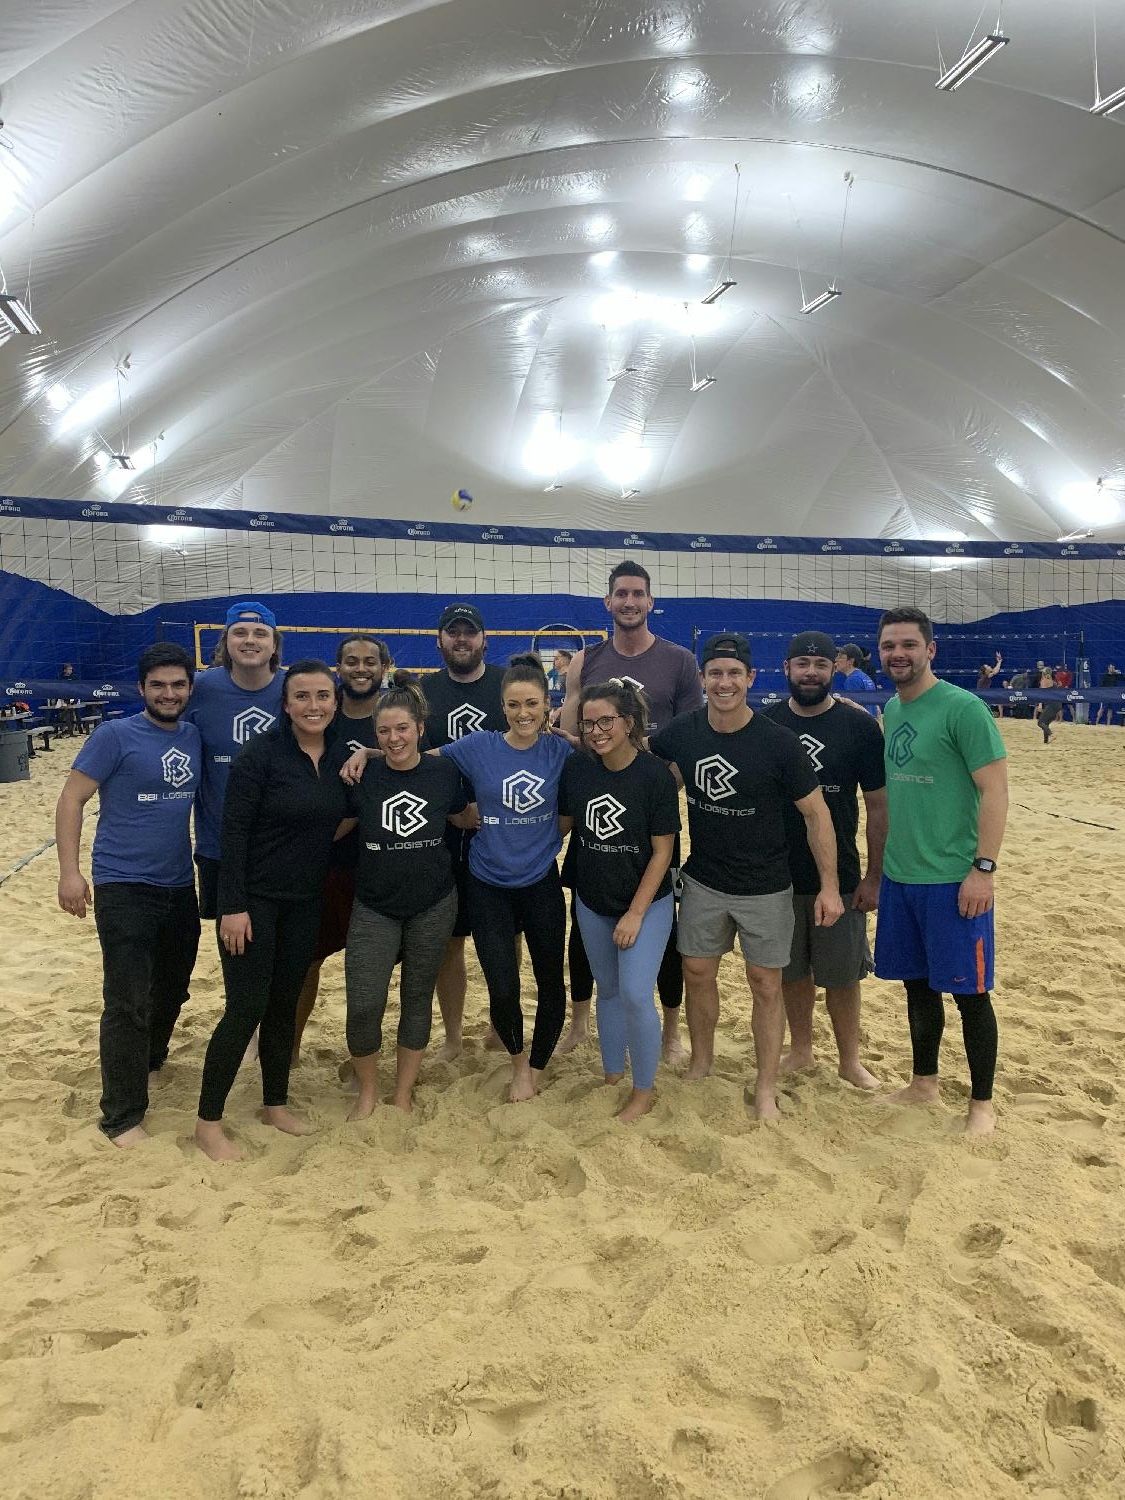 Our sand volleyball team